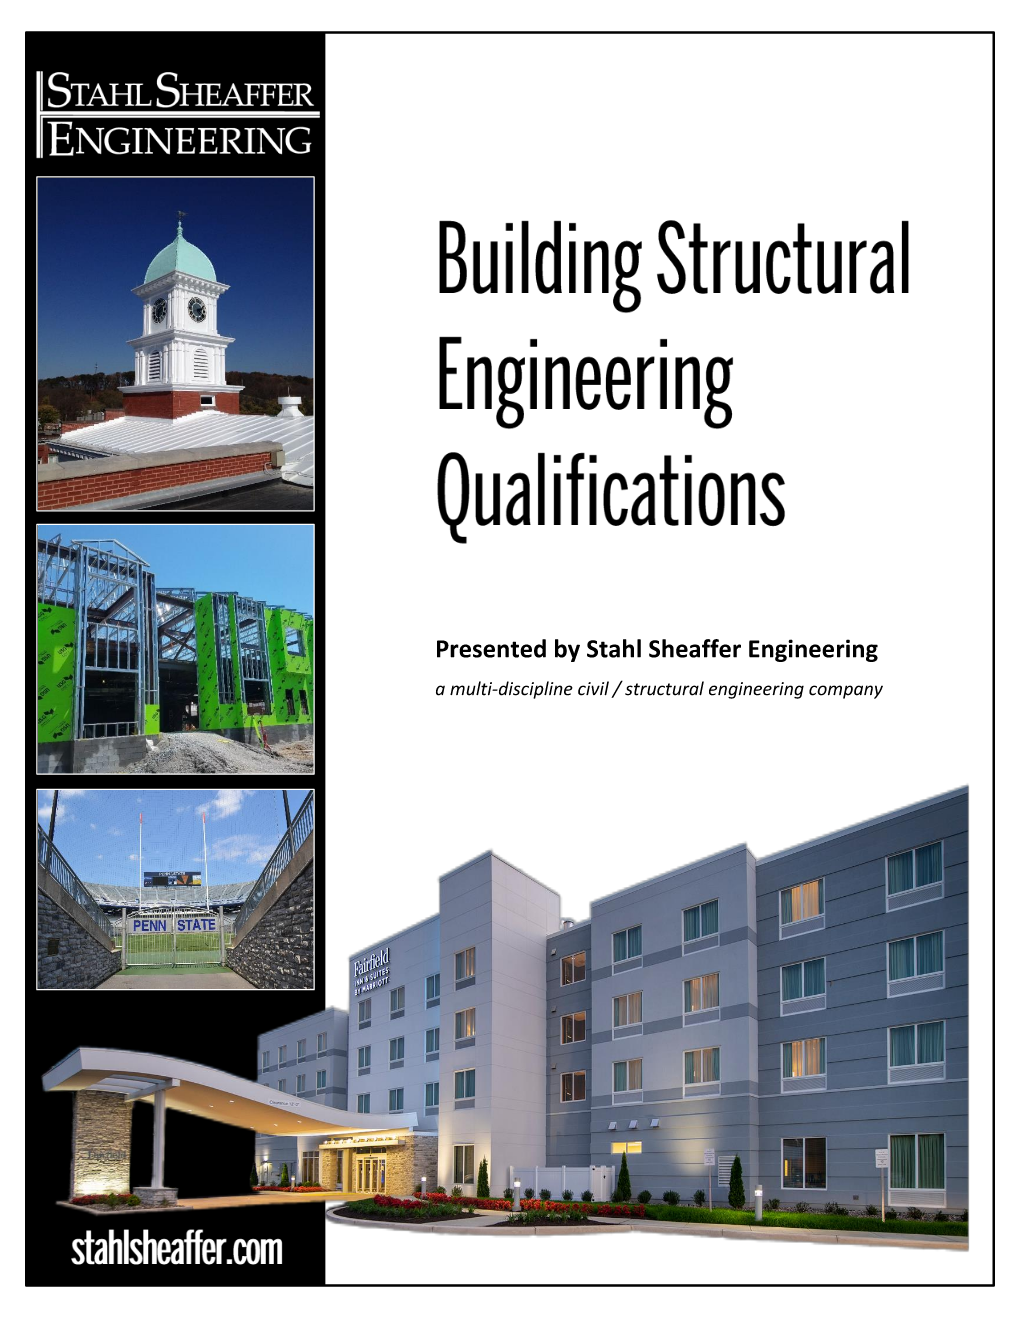 Building Structural Engineering Qualifications